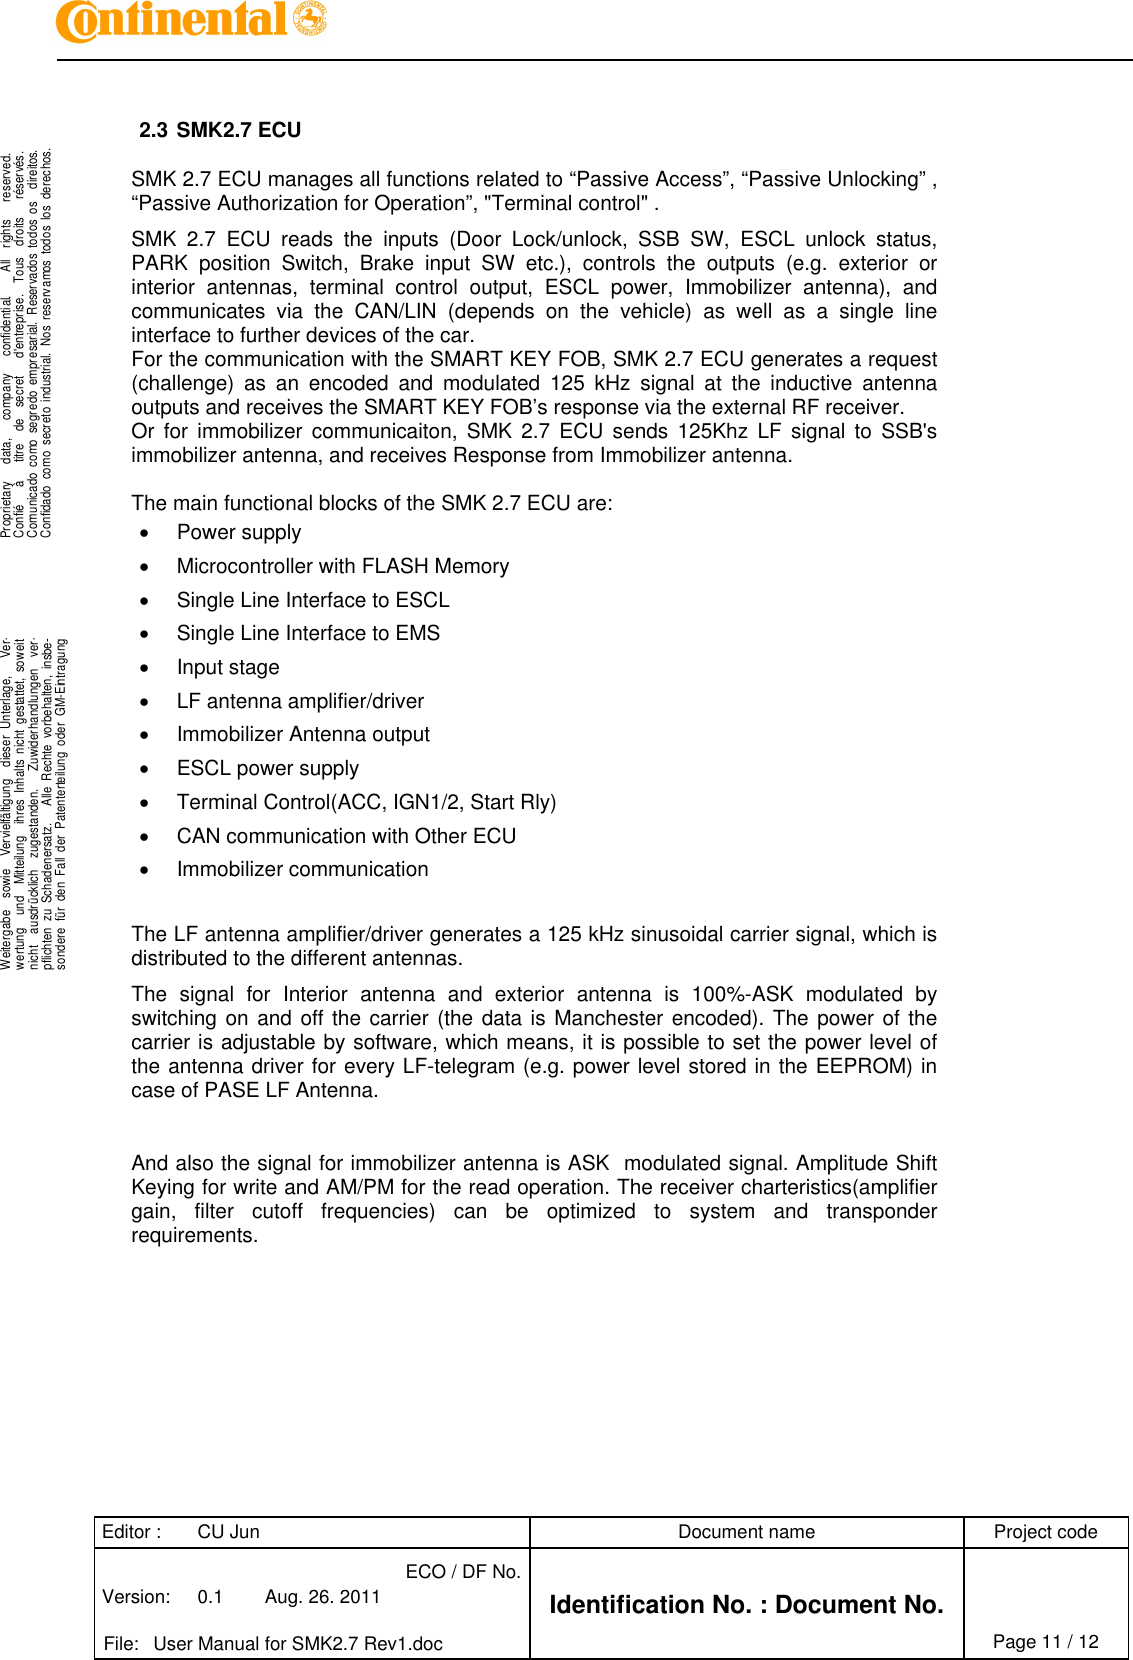 Editor : CU Jun Document name Project codeVersion: 0.1 Aug. 26. 2011ECO / DF No.Identification No. : Document No.File: User Manual for SMK2.7 Rev1.doc Page 11 / 12.Proprietary data, company confidential. All rights reserved.Confié à titre de secret d&apos;entreprise. Tous droits réservés.Comunicado como segredo empresarial. Reservados todos os direitos.Confidado como secreto industrial. Nos reservamos todos los derechos...Weitergabe sowie Vervielfältigung dieser Unterlage, Ver-wertung und Mitteilung ihres Inhalts nicht gestattet, soweitnicht ausdrücklich zugestanden. Zuwiderhandlungen ver-pflichten zu Schadenersatz. Alle Rechte vorbehalten, insbe-sondere für den Fall der Patenterteilung oder GM-Eintragung..2.3 SMK2.7 ECUSMK 2.7 ECU manages all functions related to “Passive Access”, “Passive Unlocking” ,“Passive Authorization for Operation”, &quot;Terminal control&quot; .SMK 2.7 ECU reads the inputs (Door Lock/unlock, SSB SW, ESCL unlock status,PARK position Switch, Brake input SW etc.), controls the outputs (e.g. exterior orinterior antennas, terminal control output, ESCL power, Immobilizer antenna), andcommunicates via the CAN/LIN (depends on the vehicle) as well as a single lineinterface to further devices of the car.For the communication with the SMART KEY FOB, SMK 2.7 ECU generates a request(challenge) as an encoded and modulated 125 kHz signal at the inductive antennaoutputs and receives the SMART KEY FOB’s response via the external RF receiver.Or for immobilizer communicaiton, SMK 2.7 ECU sends 125Khz LF signal to SSB&apos;simmobilizer antenna, and receives Response from Immobilizer antenna.The main functional blocks of the SMK 2.7 ECU are:Power supplyMicrocontroller with FLASH MemorySingle Line Interface to ESCLSingle Line Interface to EMSInput stageLF antenna amplifier/driverImmobilizer Antenna outputESCL power supplyTerminal Control(ACC, IGN1/2, Start Rly)CAN communication with Other ECUImmobilizer communicationThe LF antenna amplifier/driver generates a 125 kHz sinusoidal carrier signal, which isdistributed to the different antennas.The signal for Interior antenna and exterior antenna is 100%-ASK modulated byswitching on and off the carrier (the data is Manchester encoded). The power of thecarrier is adjustable by software, which means, it is possible to set the power level ofthe antenna driver for every LF-telegram (e.g. power level stored in the EEPROM) incase of PASE LF Antenna.And also the signal for immobilizer antenna is ASK modulated signal. Amplitude ShiftKeying for write and AM/PM for the read operation. The receiver charteristics(amplifiergain, filter cutoff frequencies) can be optimized to system and transponderrequirements.